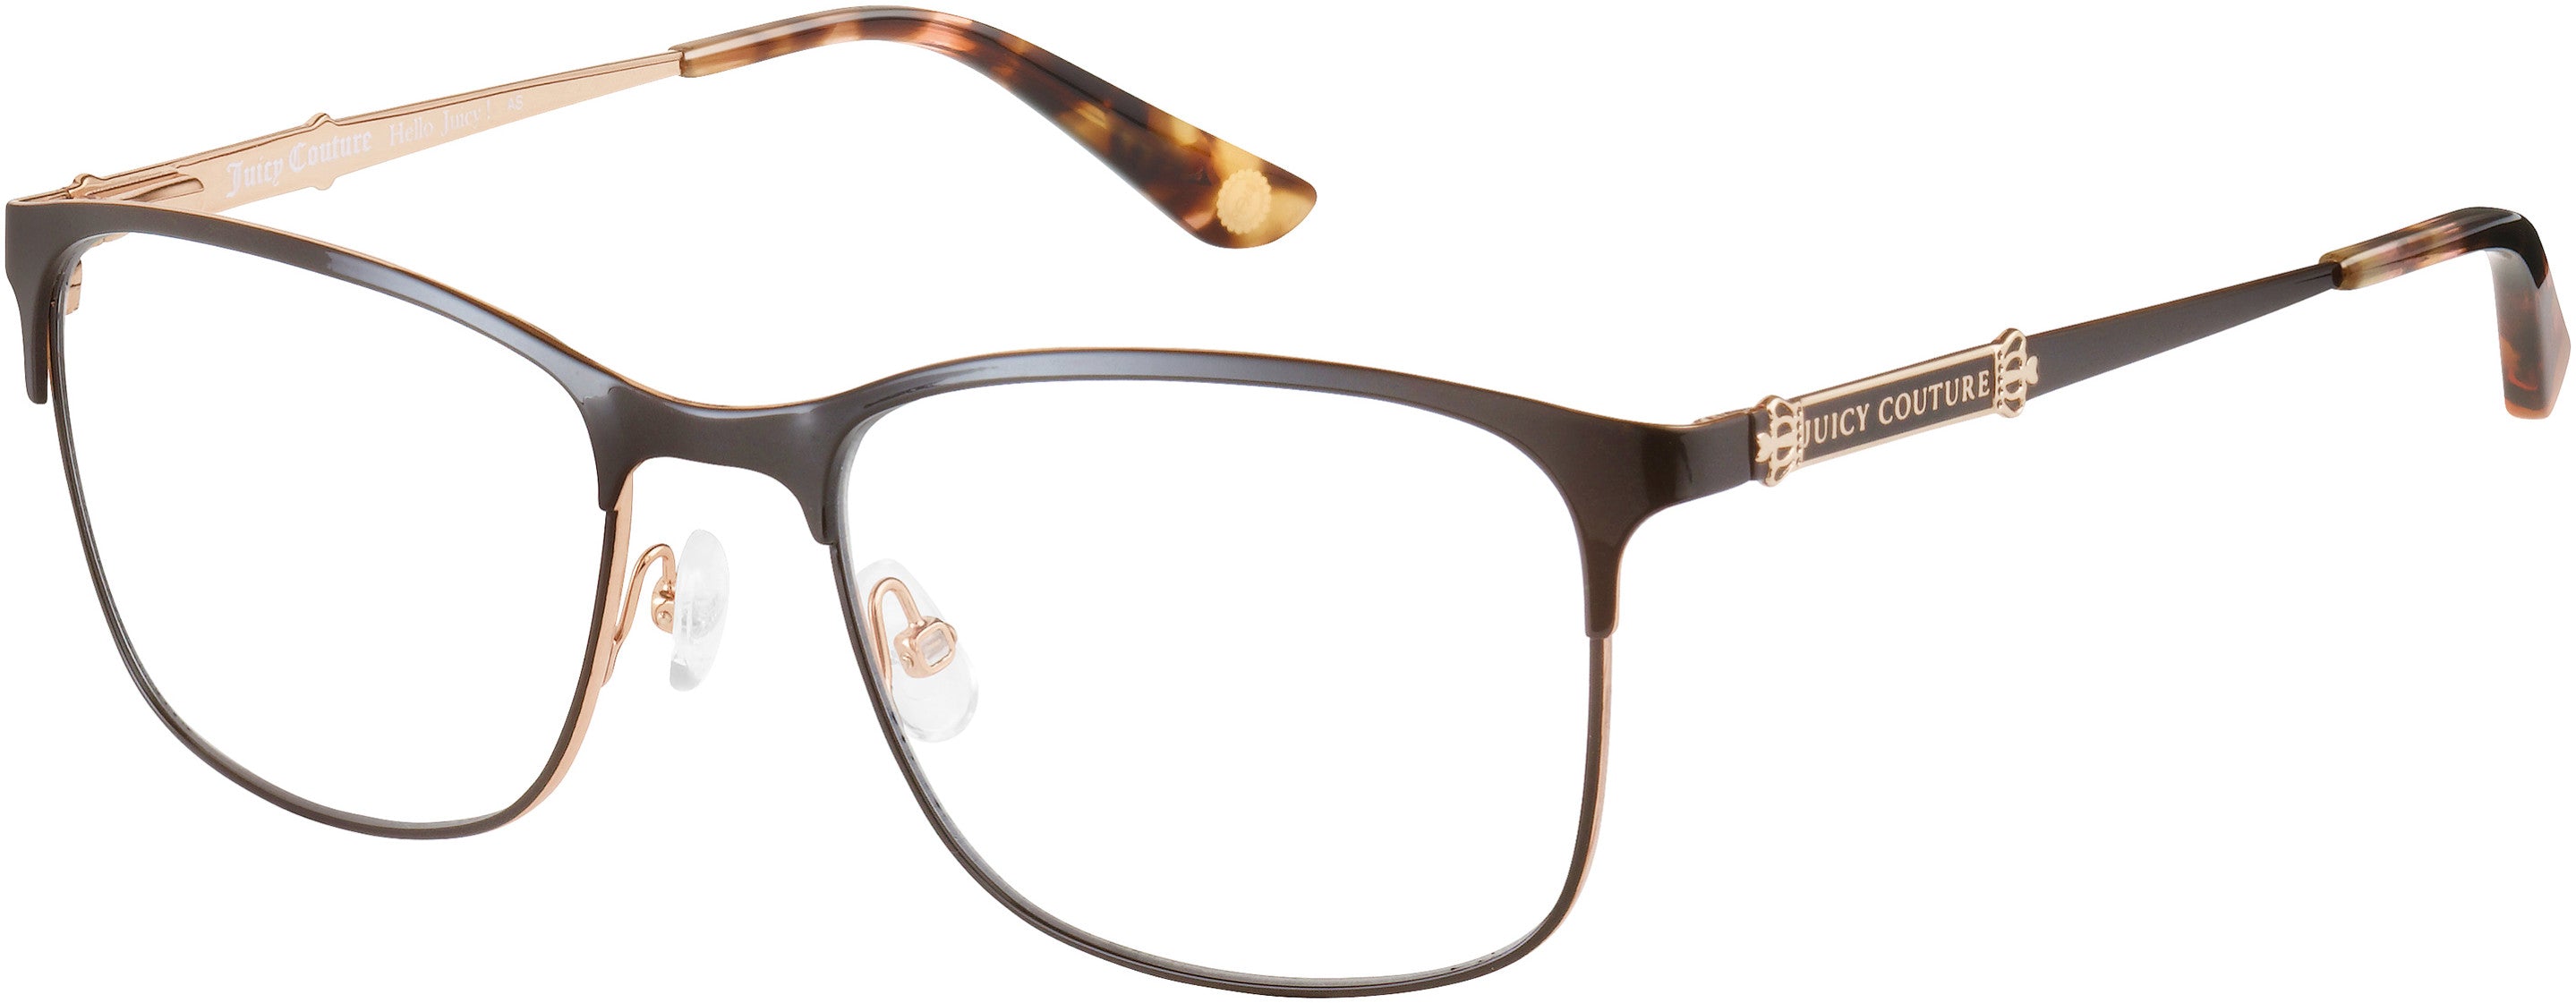 Juicy Couture Juicy 168 Square Eyeglasses 0FG4-0FG4  Brown Gold (00 Demo Lens)